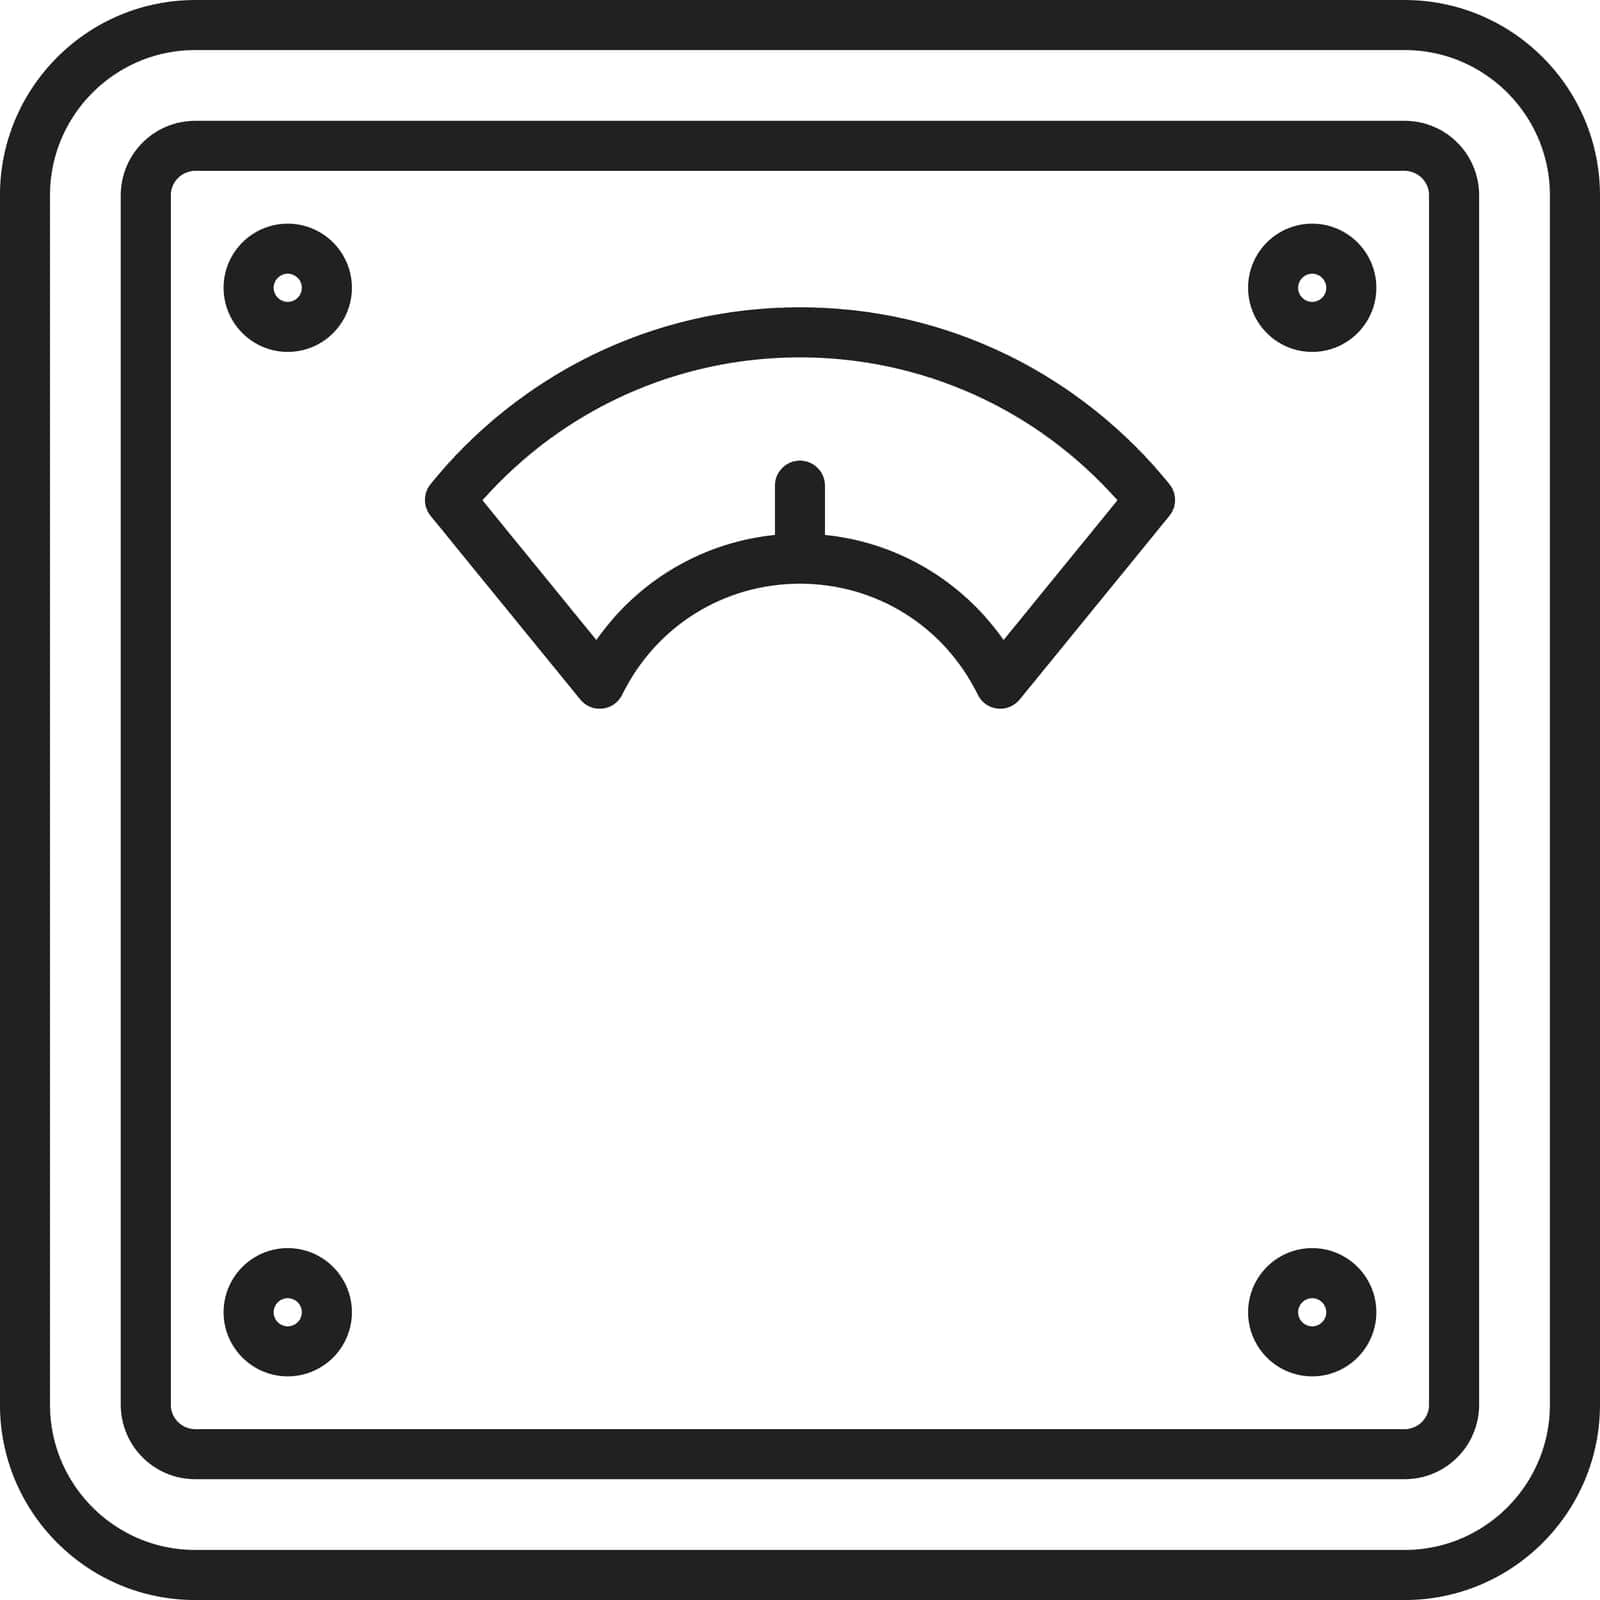 Weight Scale Icon Image. by ICONBUNNY